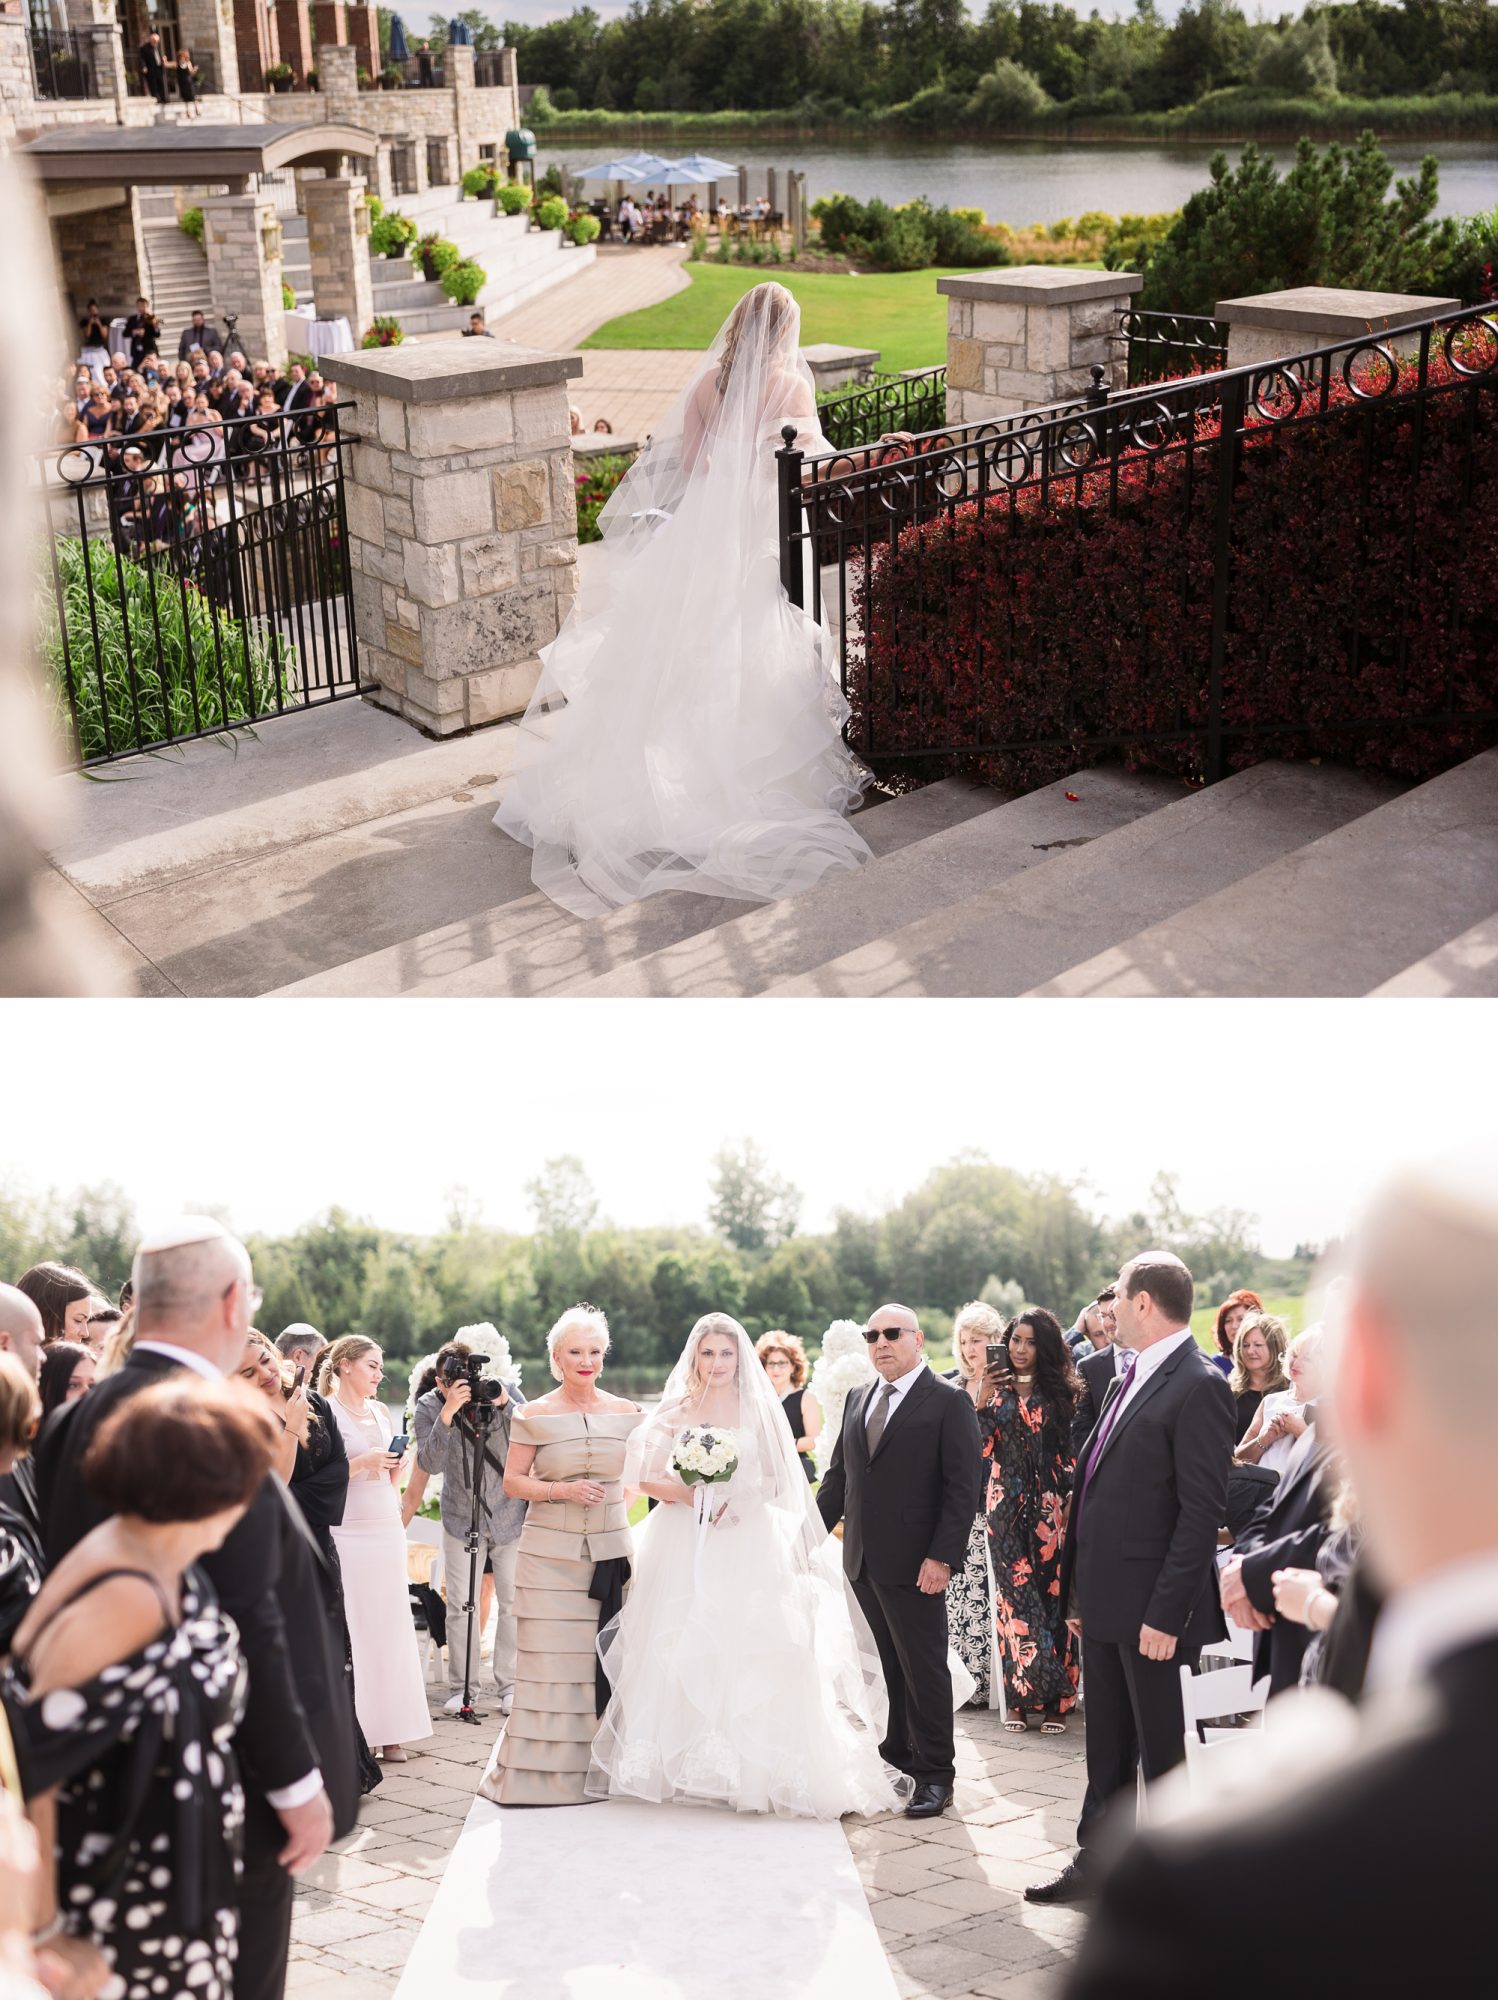 Toronto Wedding at Eagles Nest. The bride descending the staircase towards the aisle, as guests watch from below